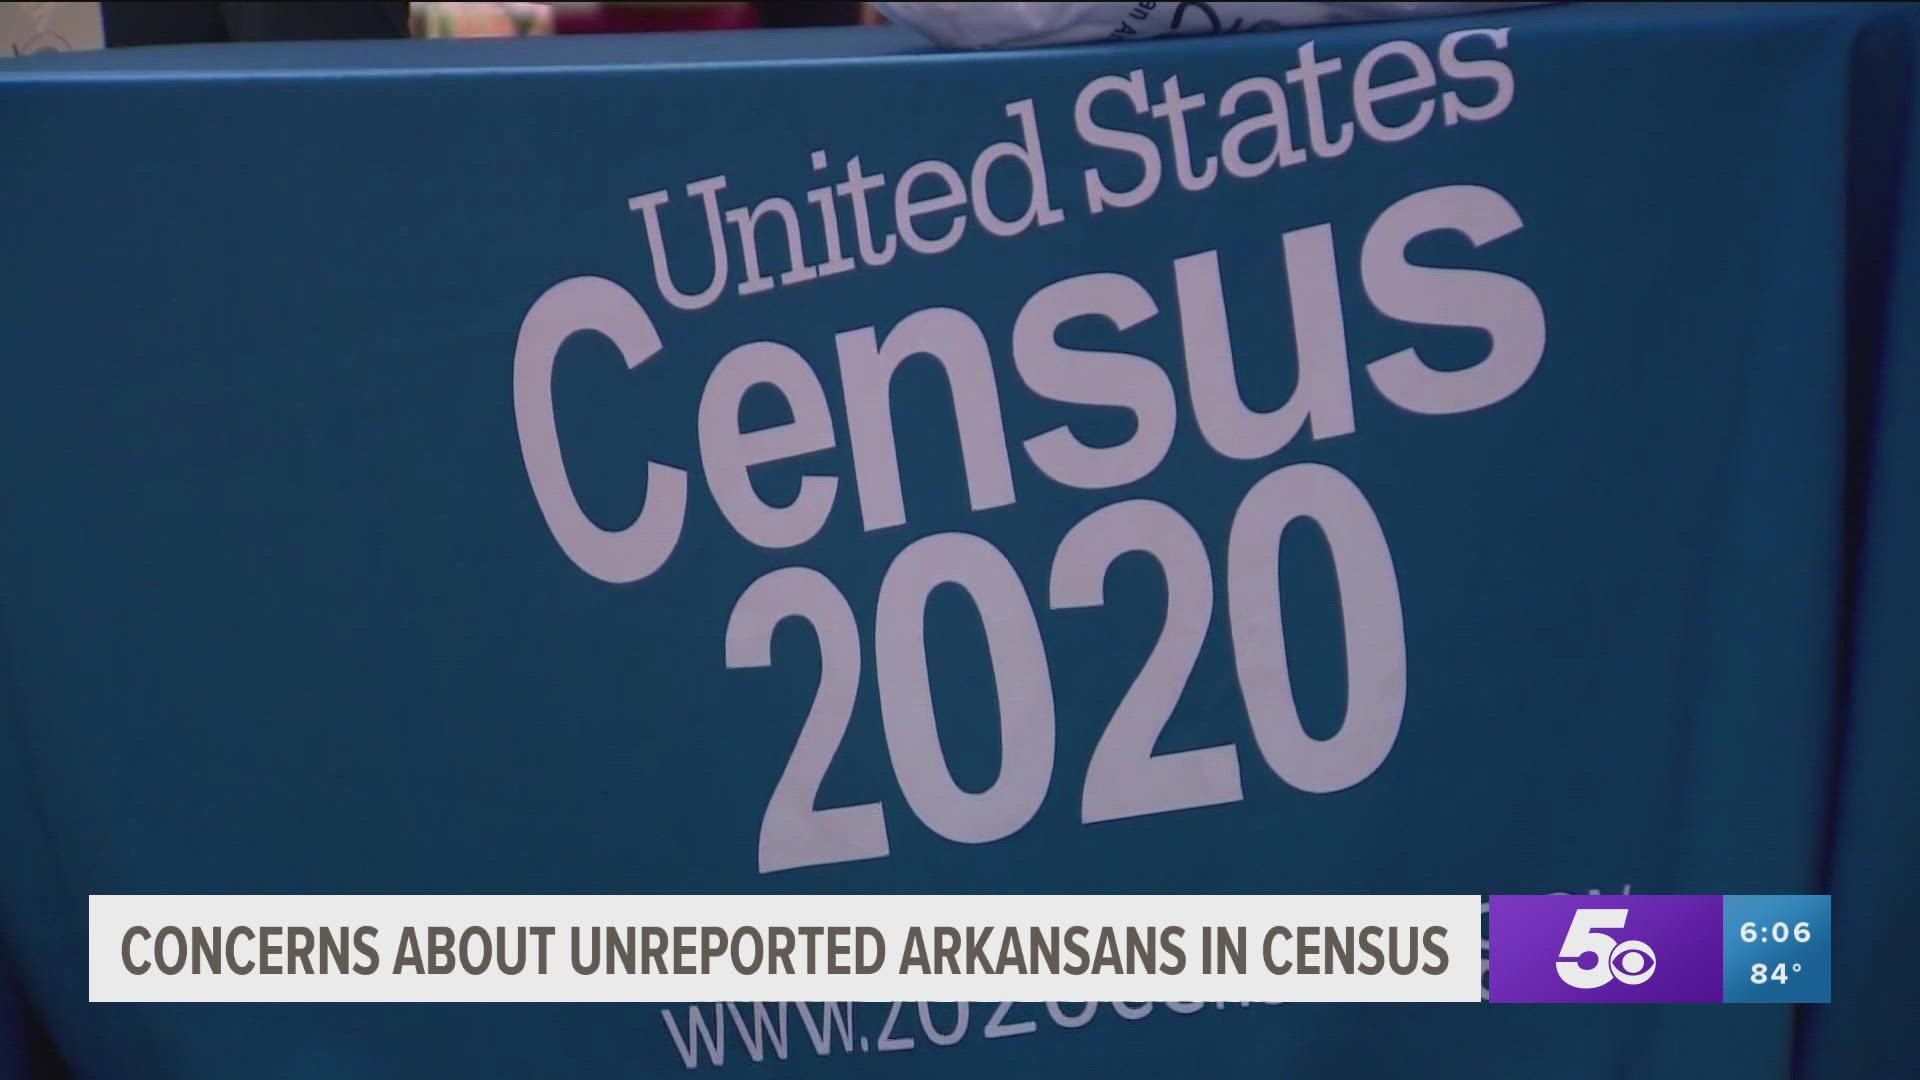 In 2020, the Census Bureau showed Arkansas surpassing 3 million residents for the first time, but now we are learning the population could be larger than we thought.